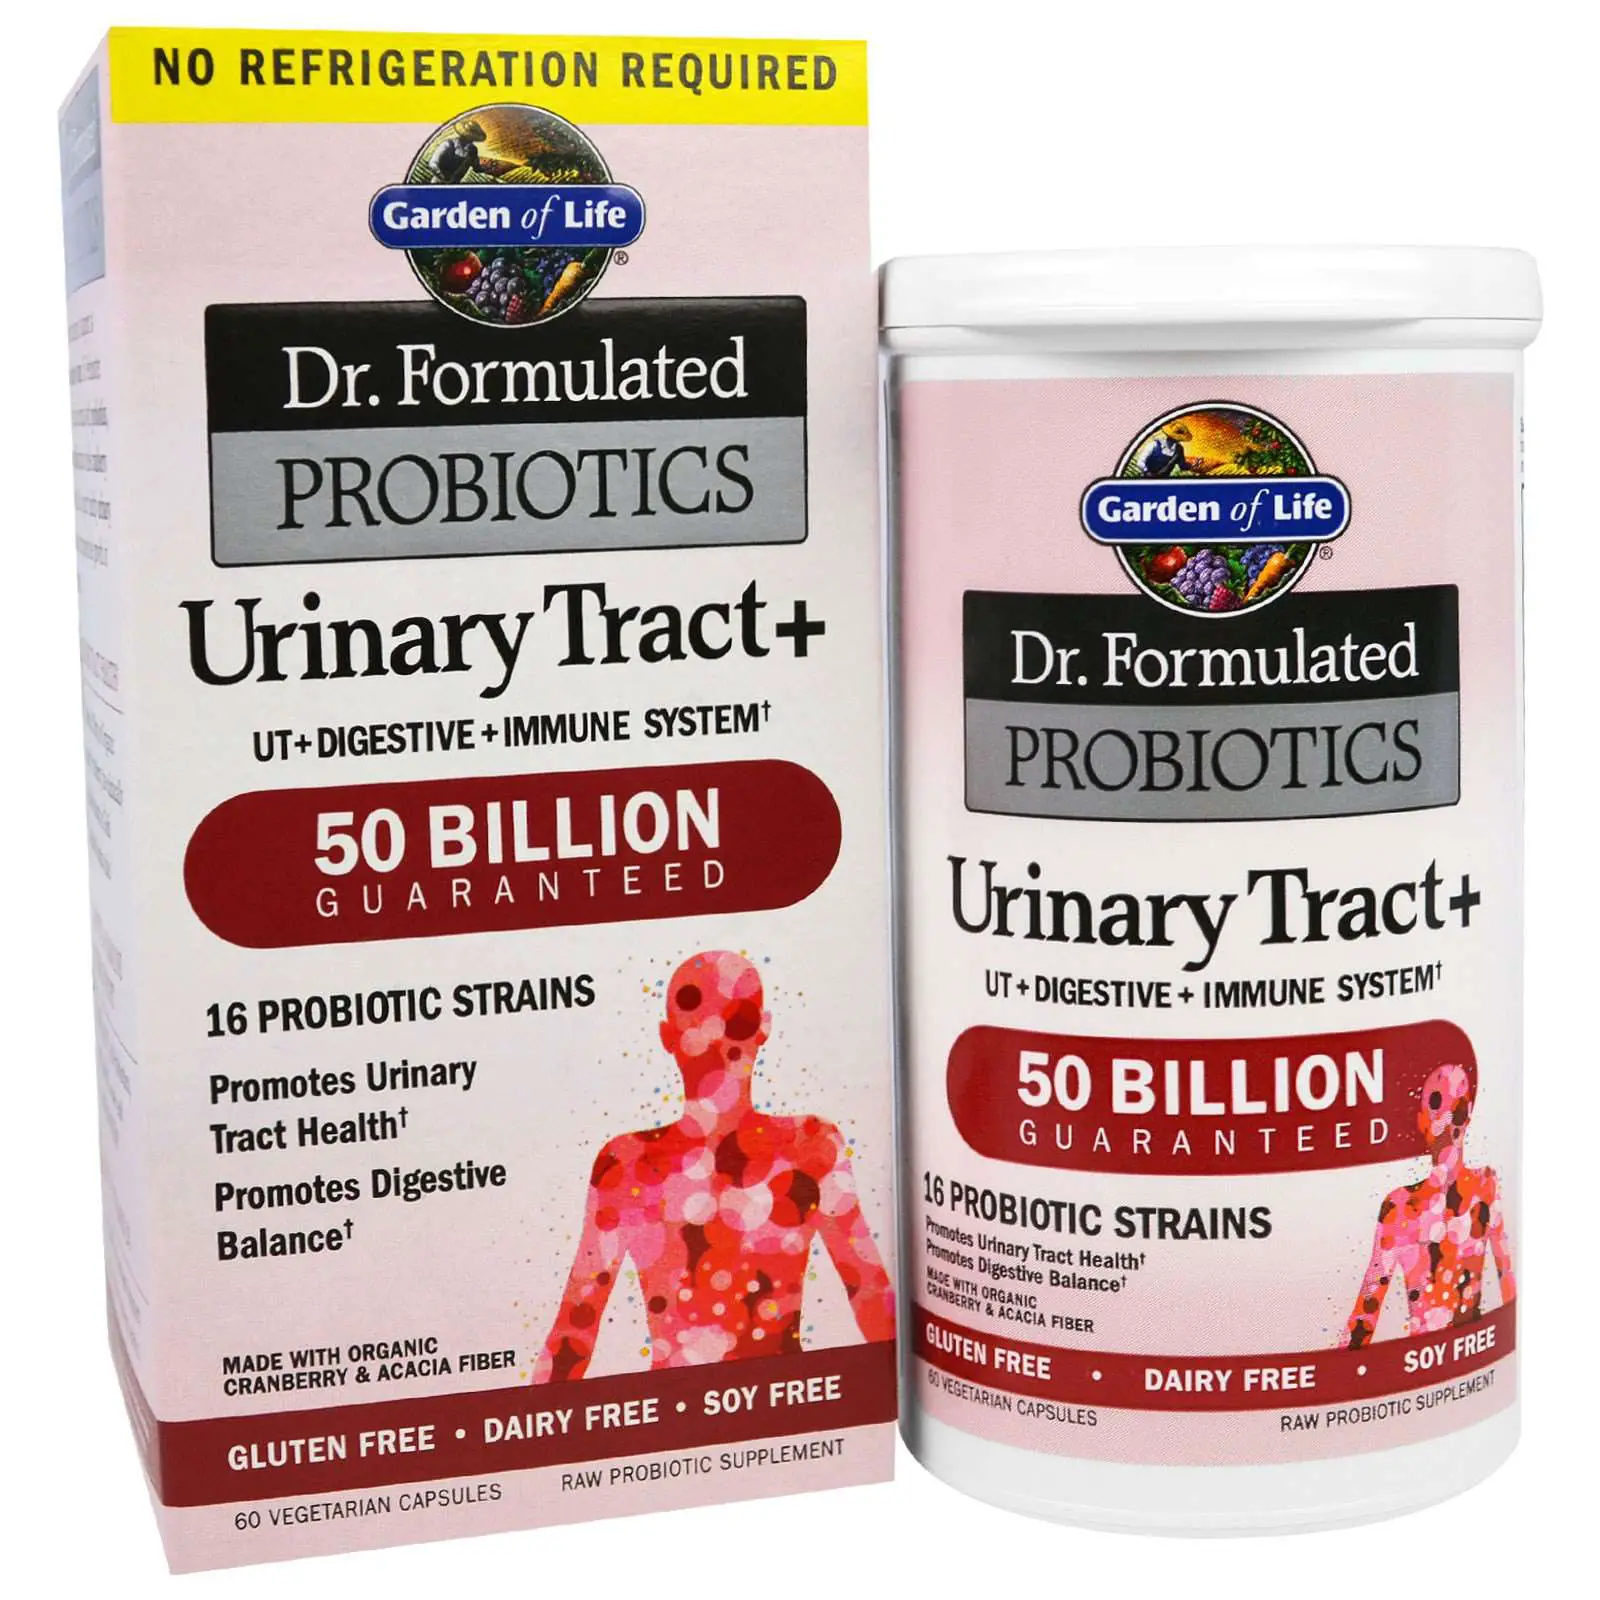 Garden of Life, Dr. Formulated Probiotics, Urinary Tract+ ...